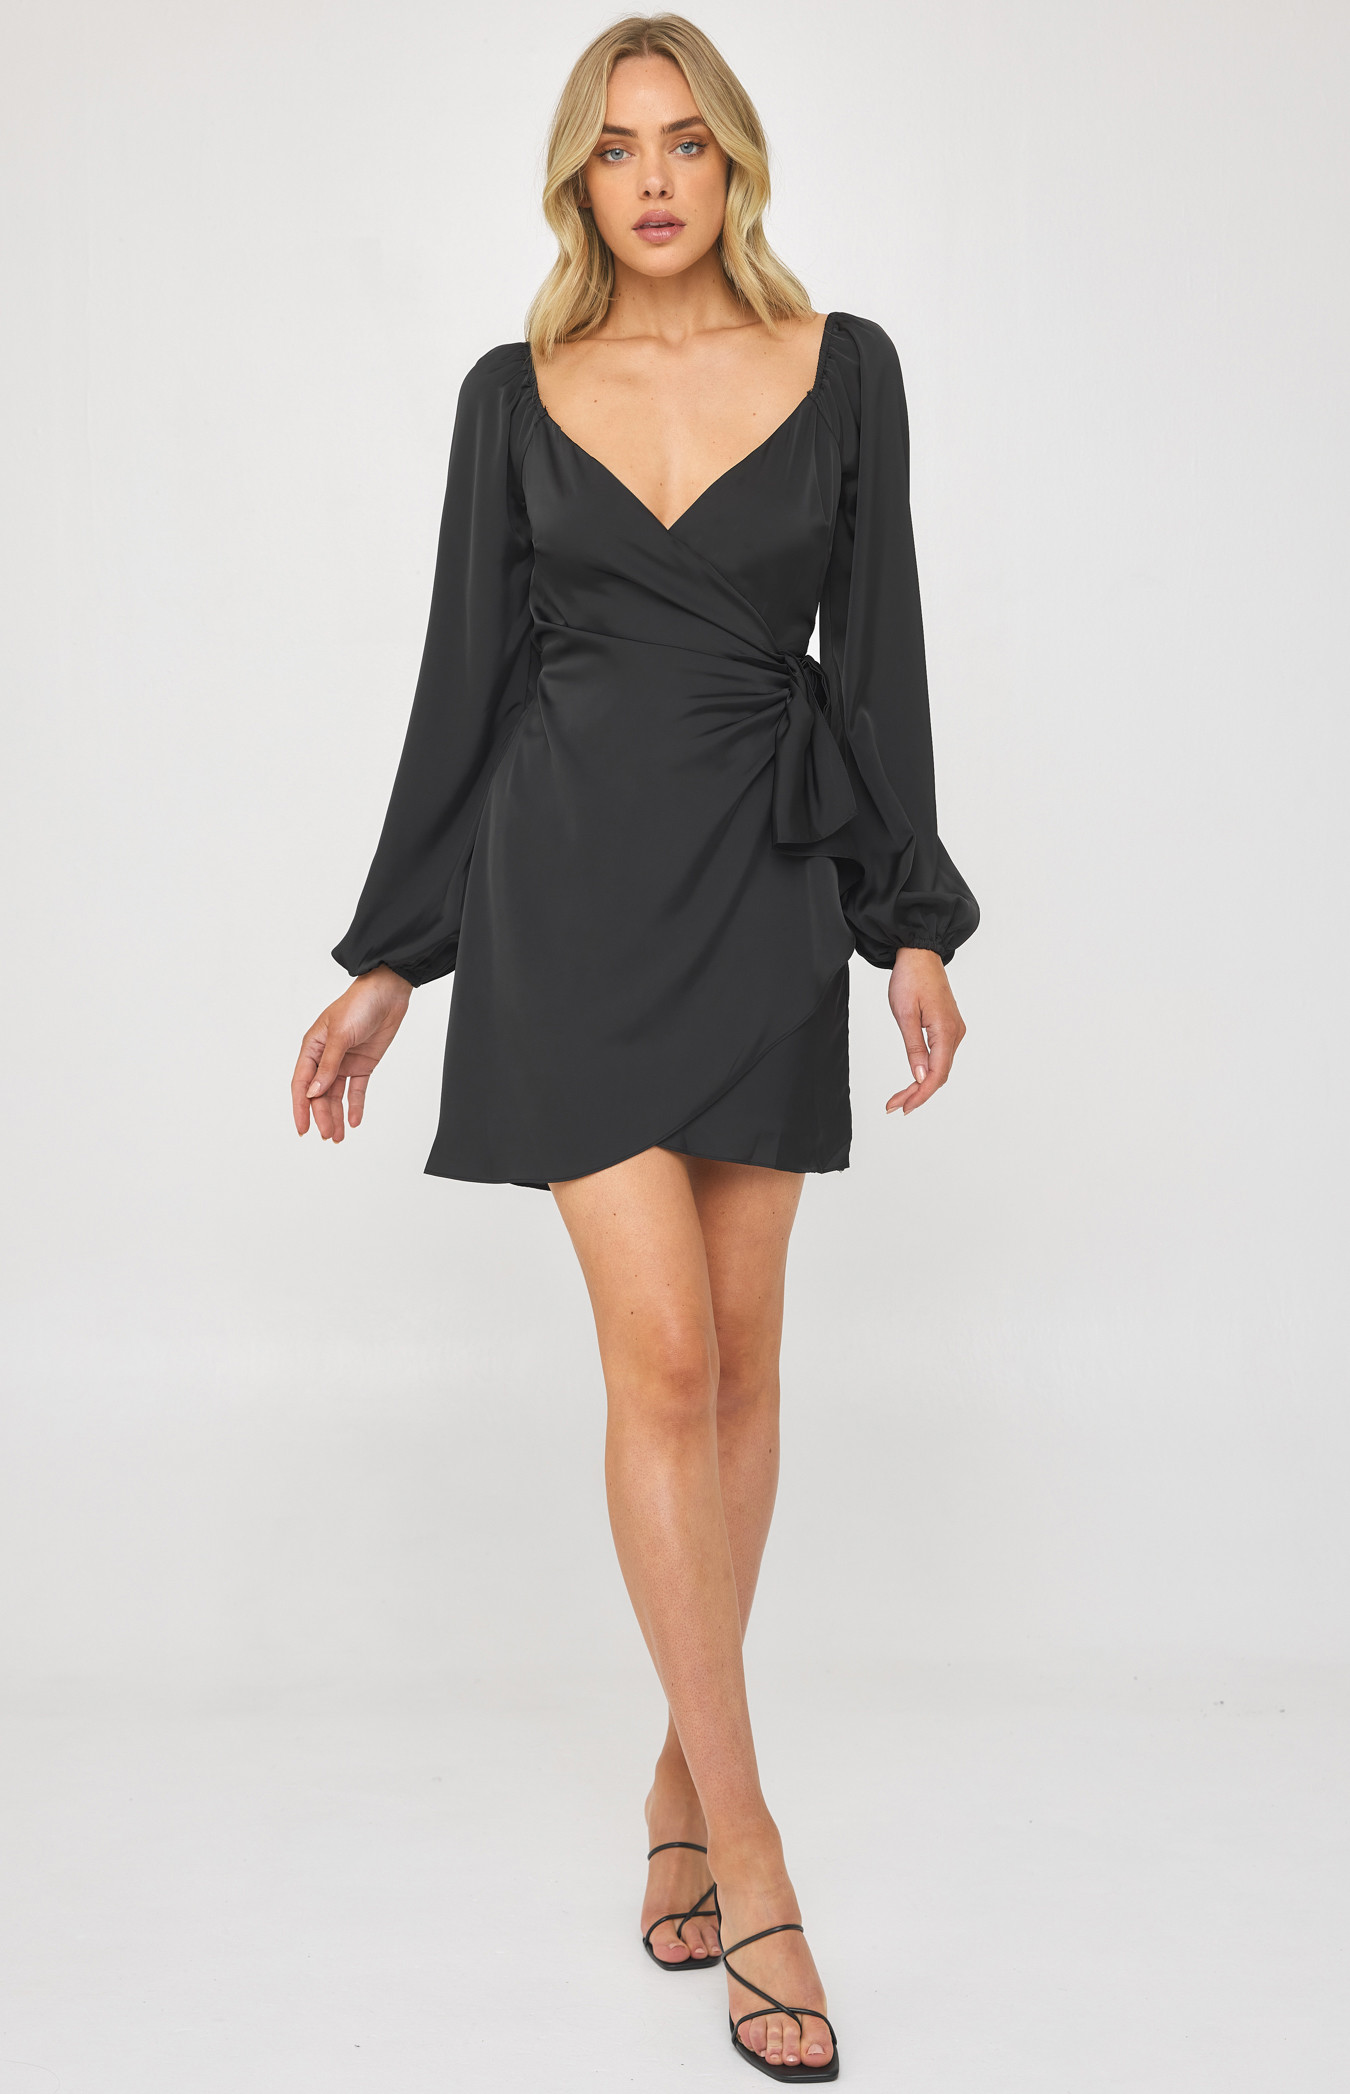 Satin Dress with Wrap Front Tie Detail (SDR1206A)